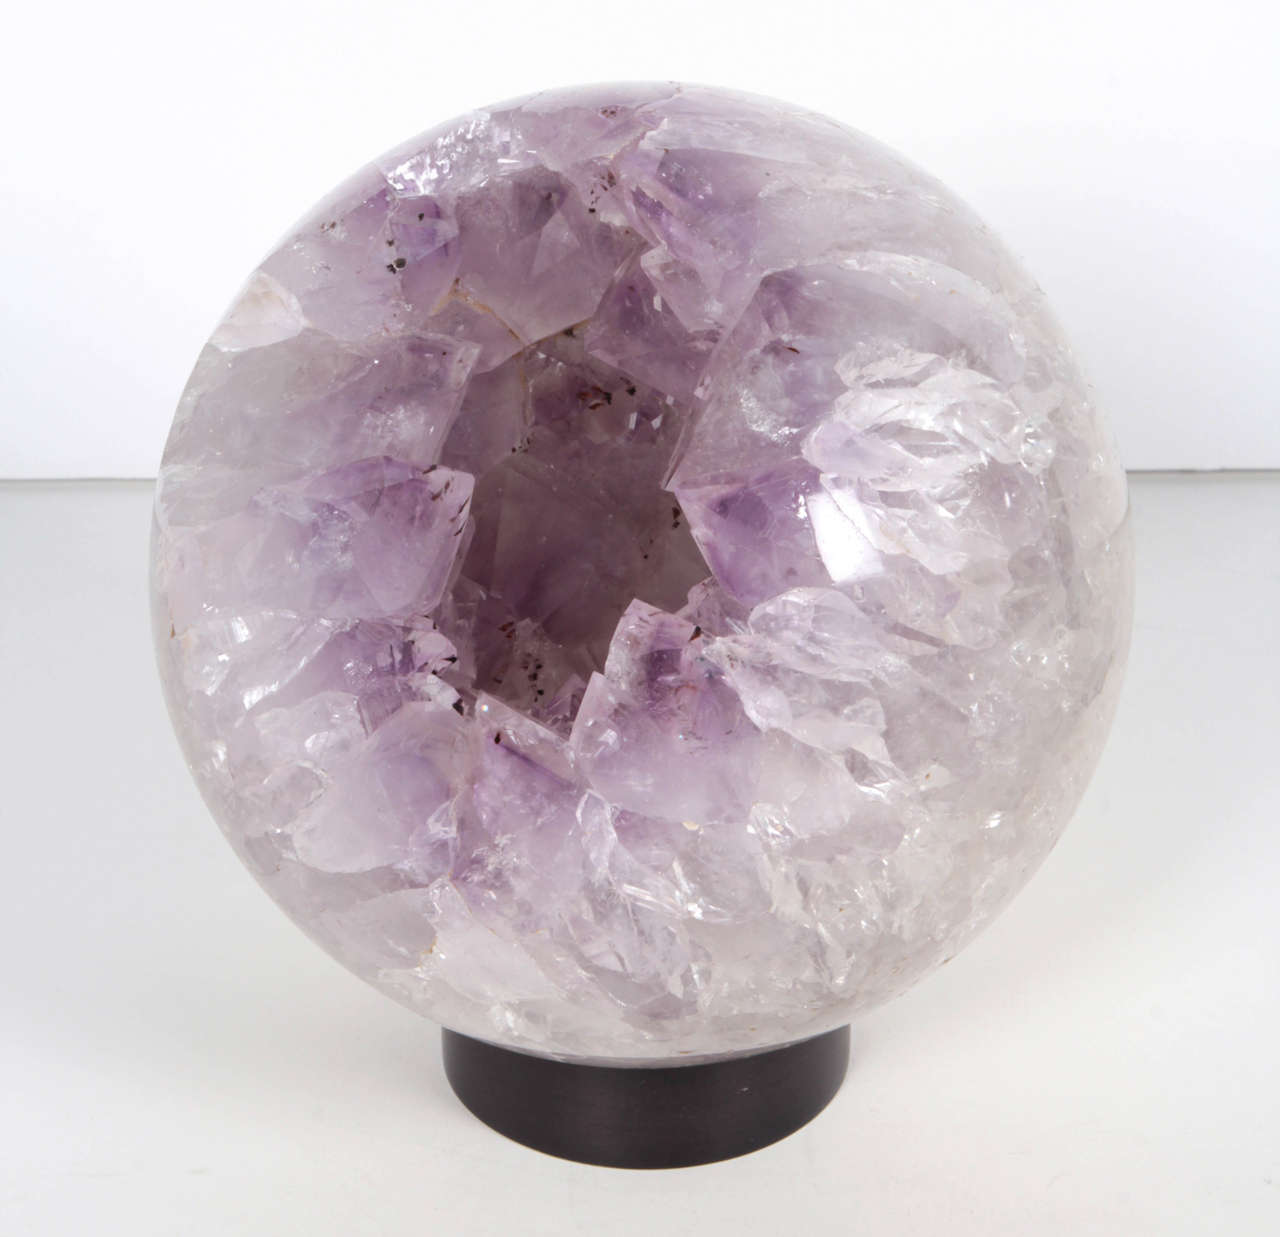 An amazing sculptural amethyst orb on metal stand.